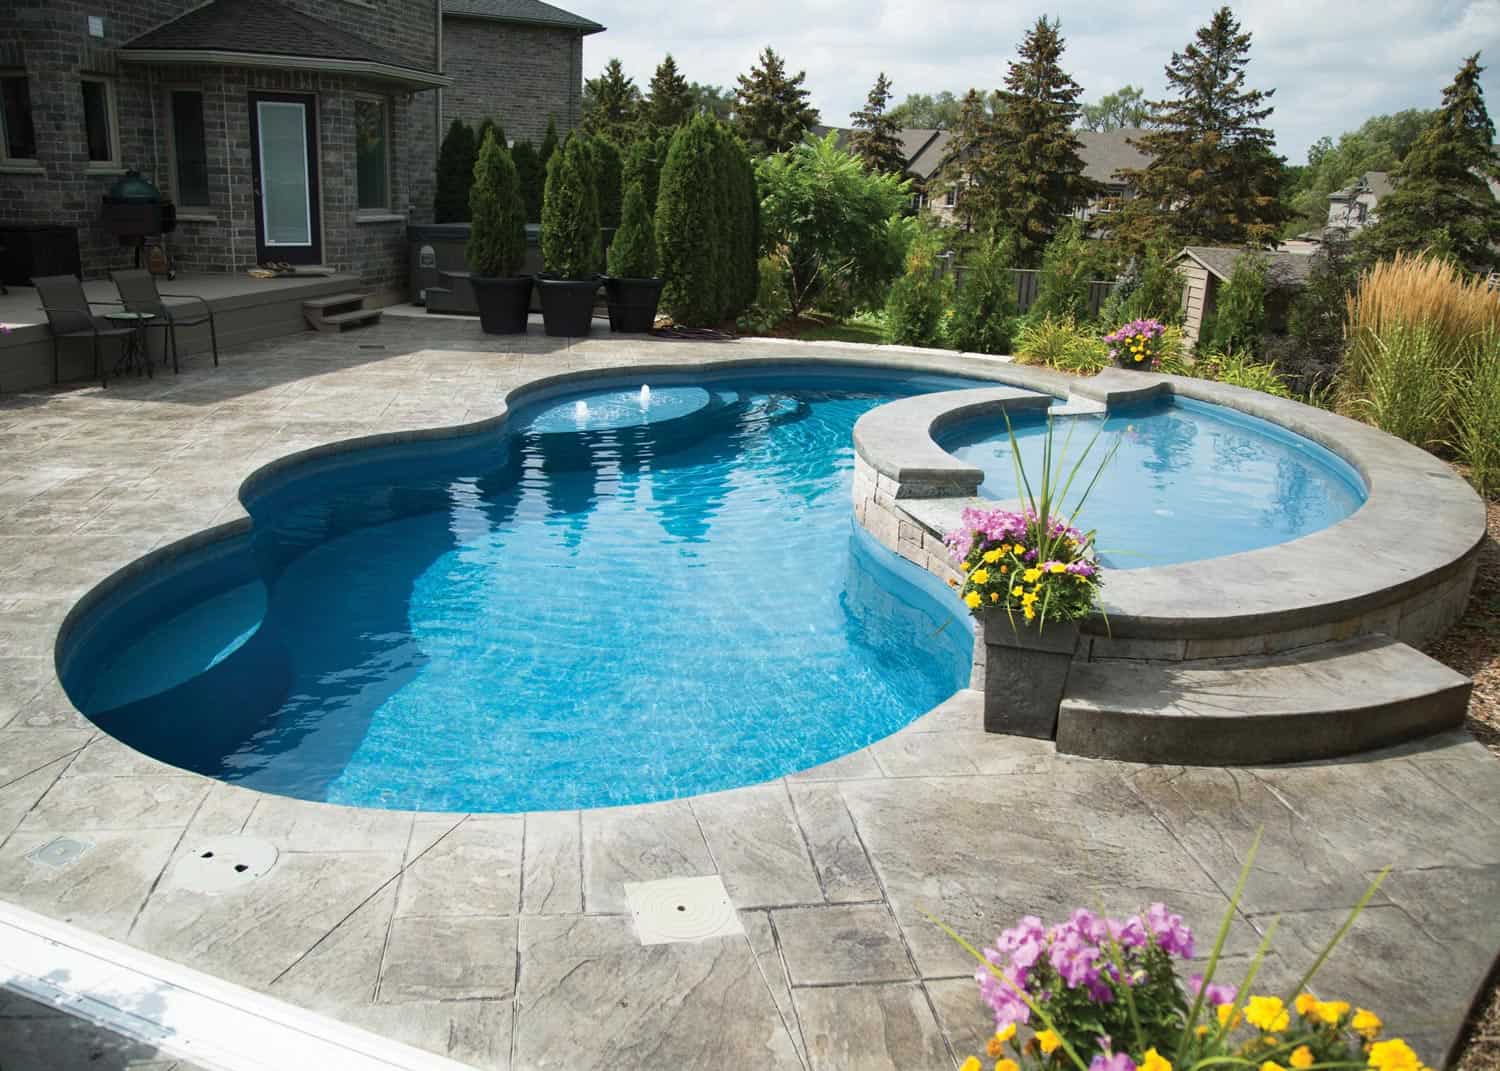 A beautiful fiberglass pool sits within a concrete pool deck as part of a well-done custom pool build. There is an attached spa with evergreen landscaping surrounding the pool area.